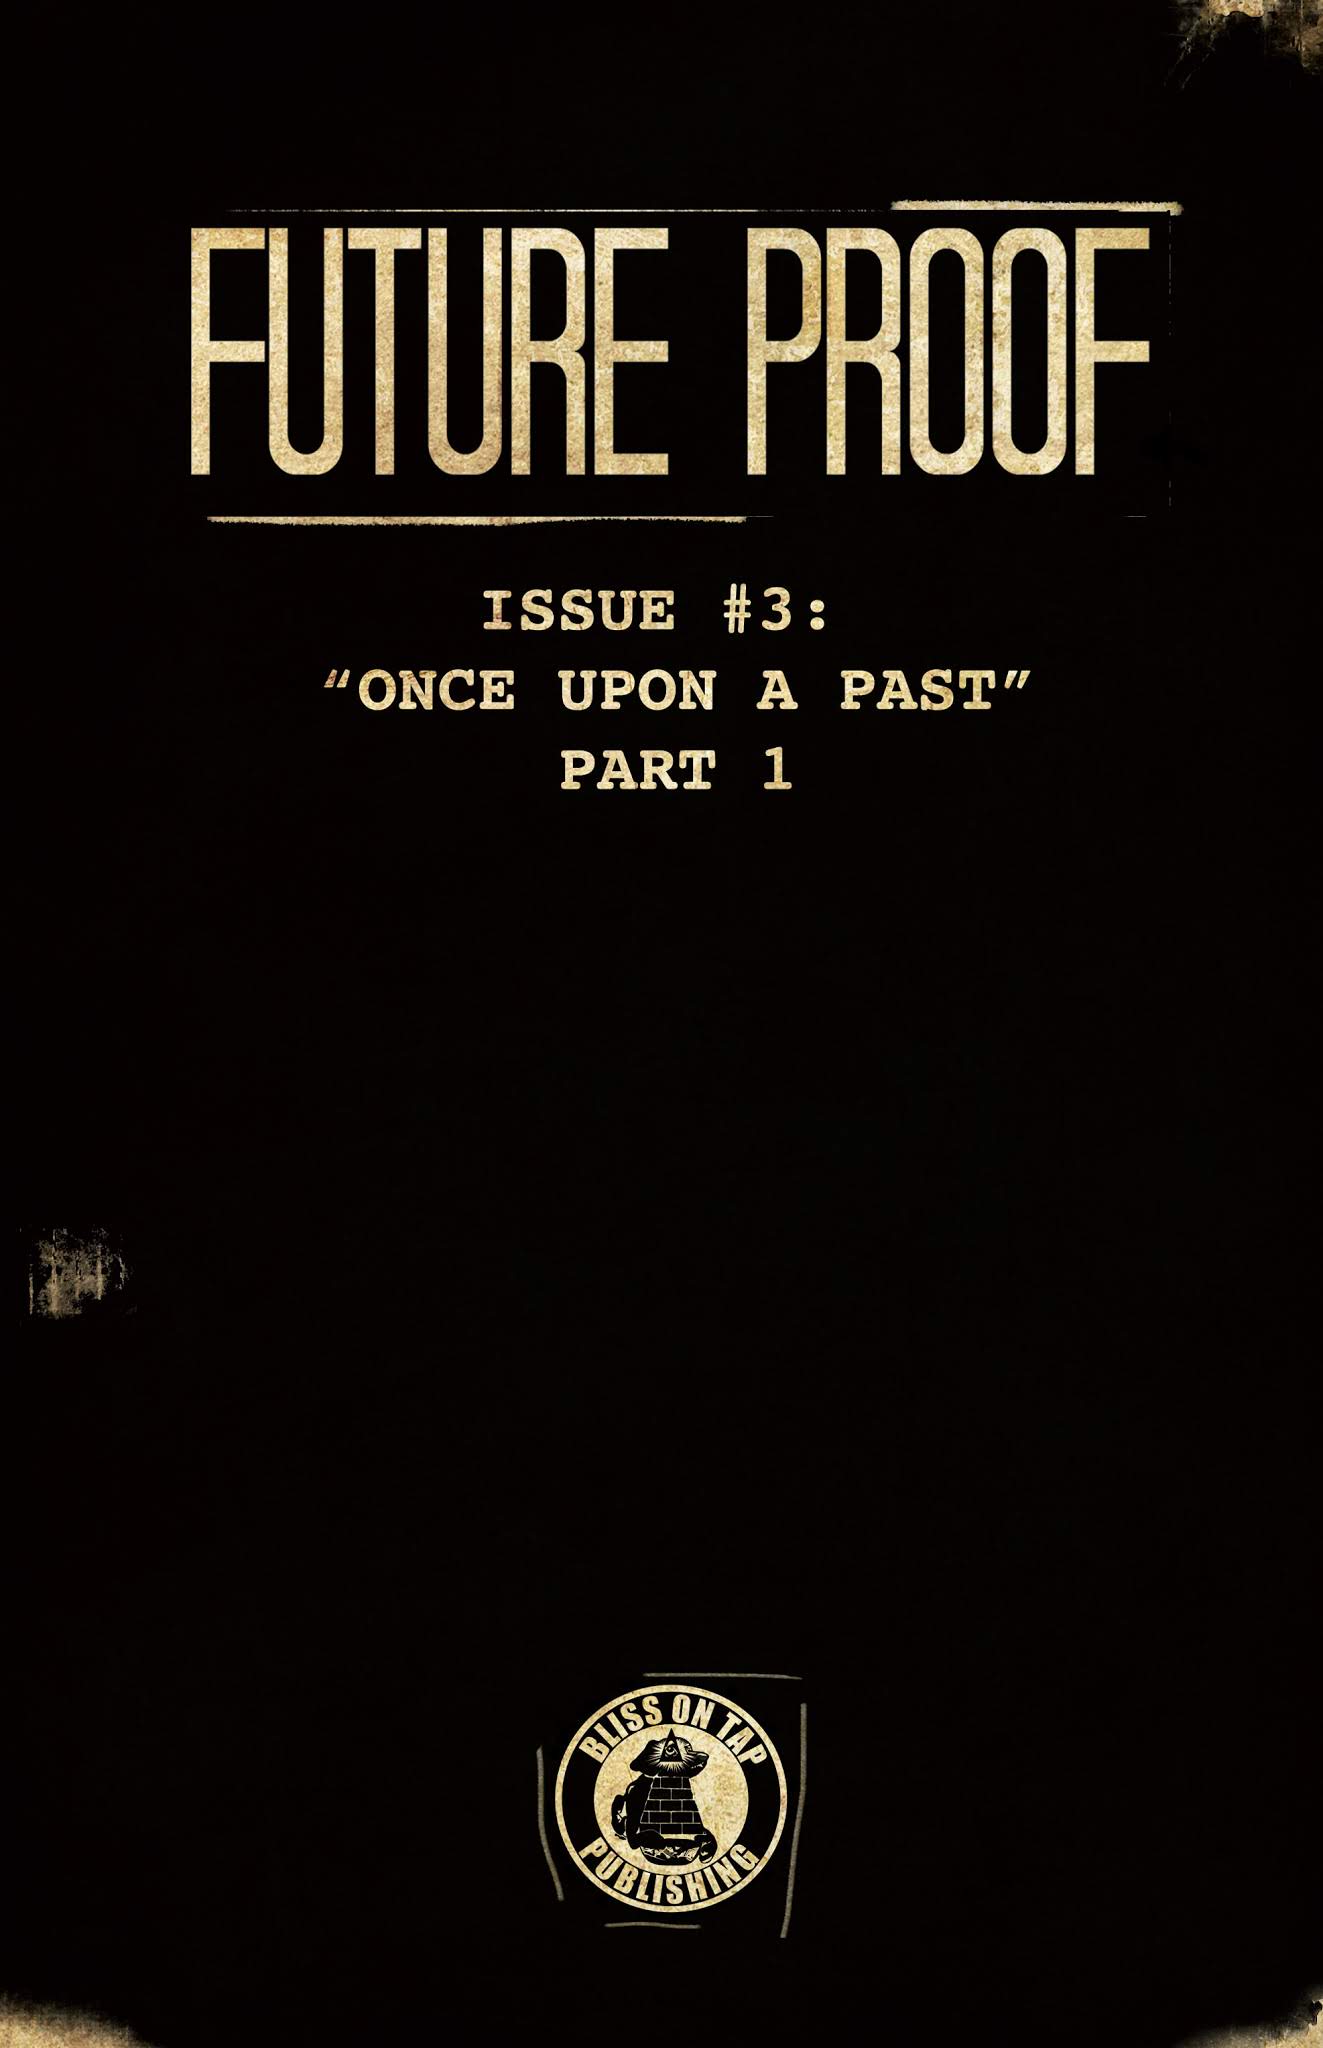 Read online Future Proof comic -  Issue #3 - 3